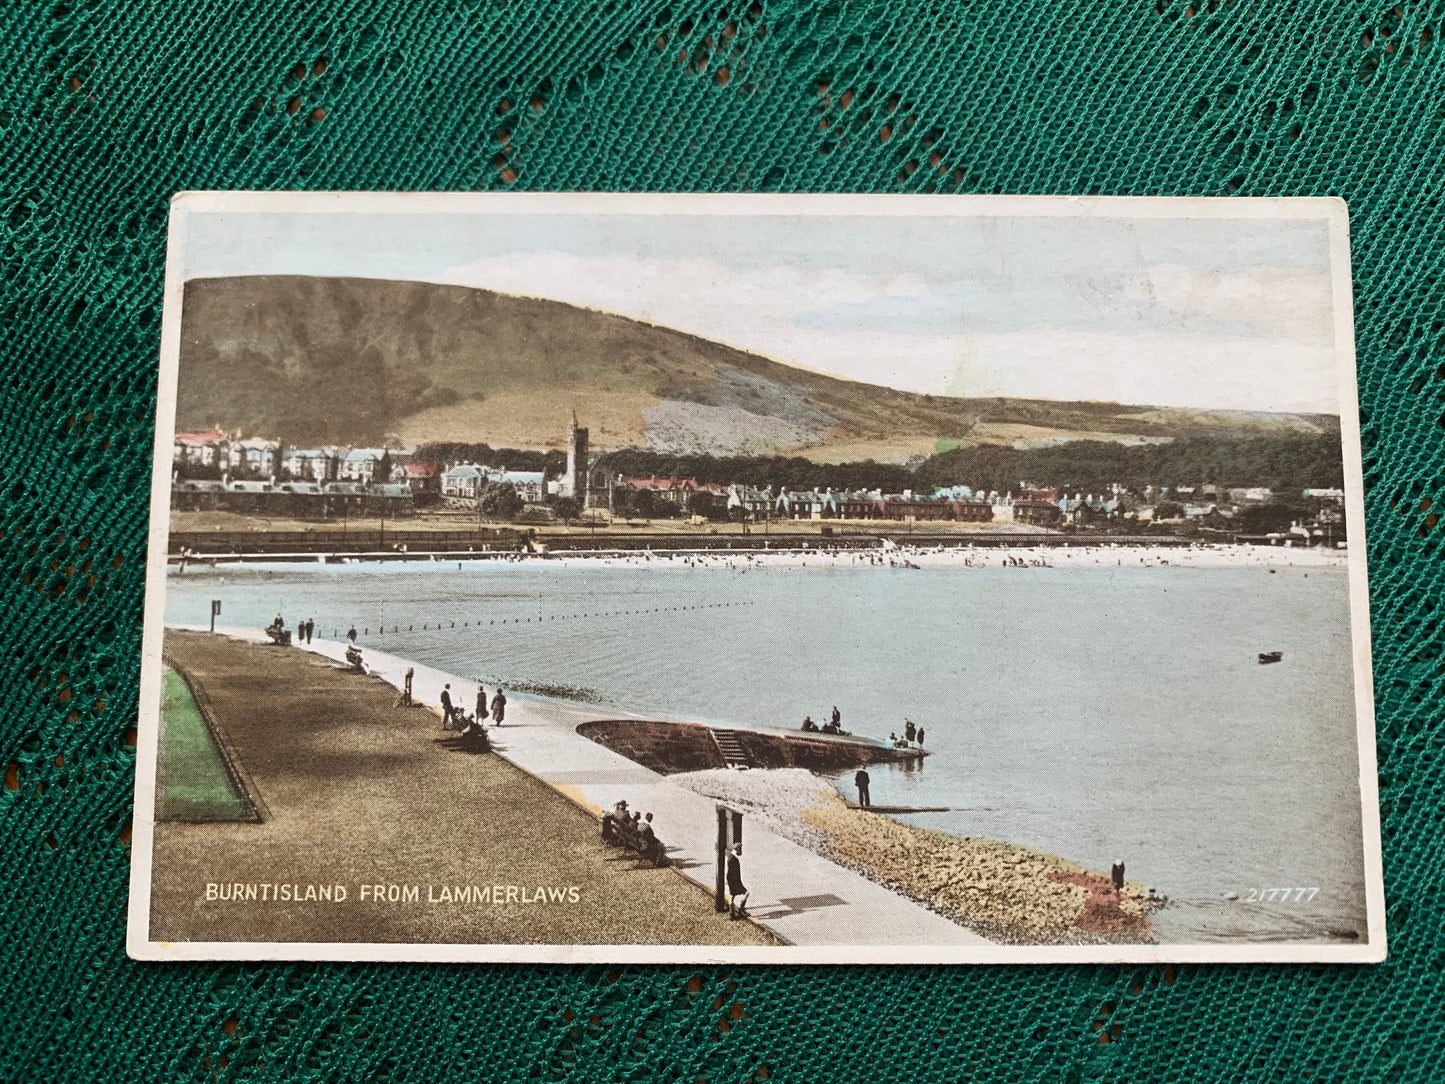 BURNTISLAND FROM LAMMERLAWS - Scotland - early 1900s - unused